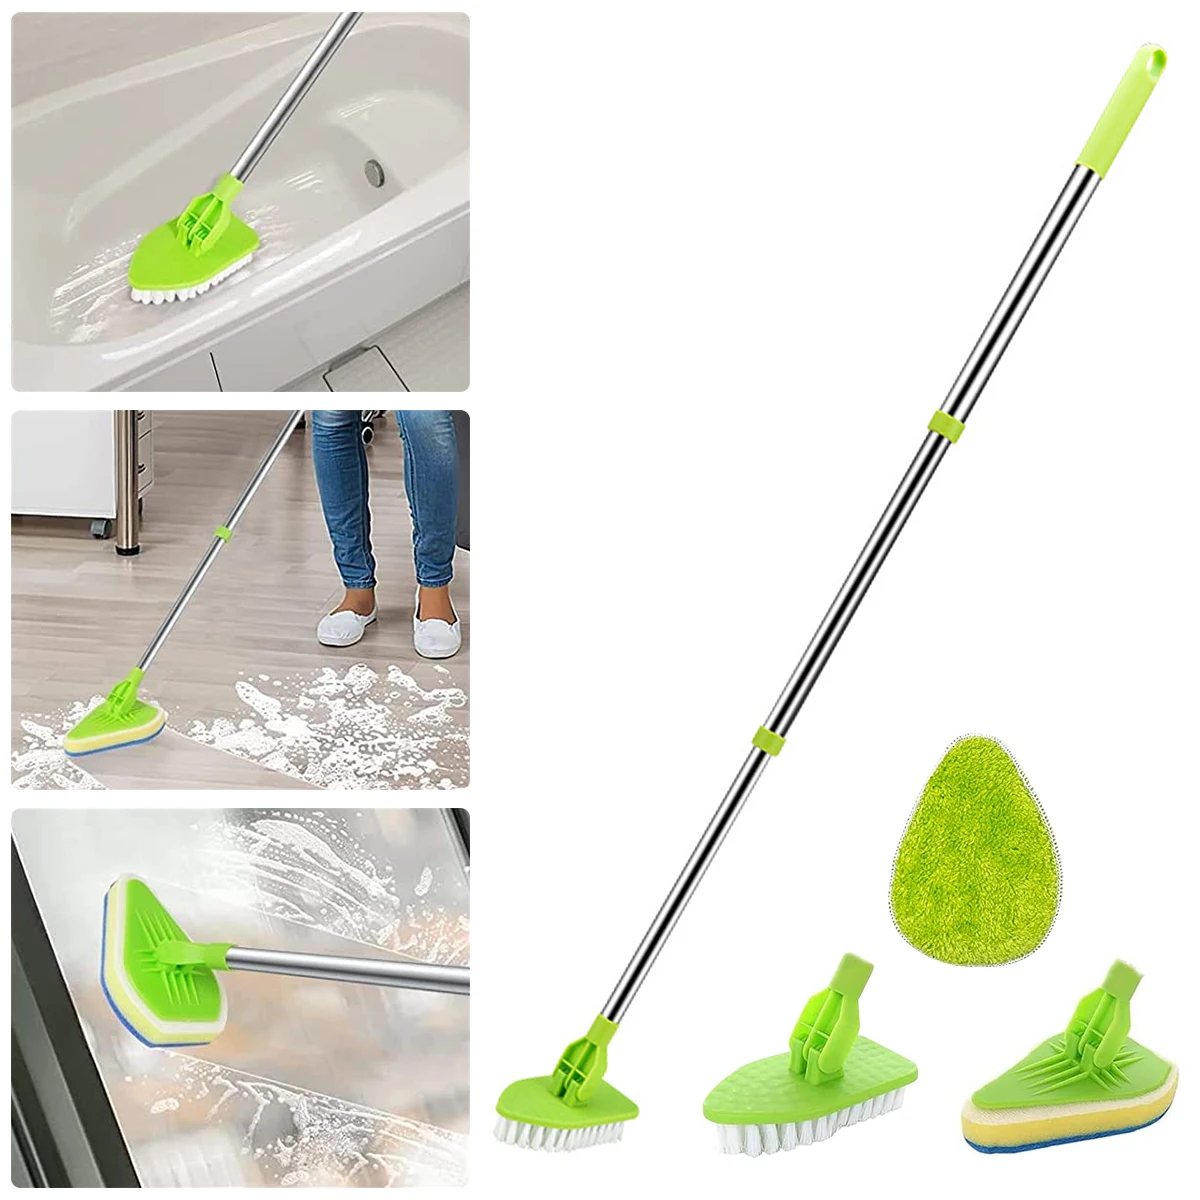 Harvic 3 in 1 Multifunctional Bathroom Cleaning Brush with Wiper